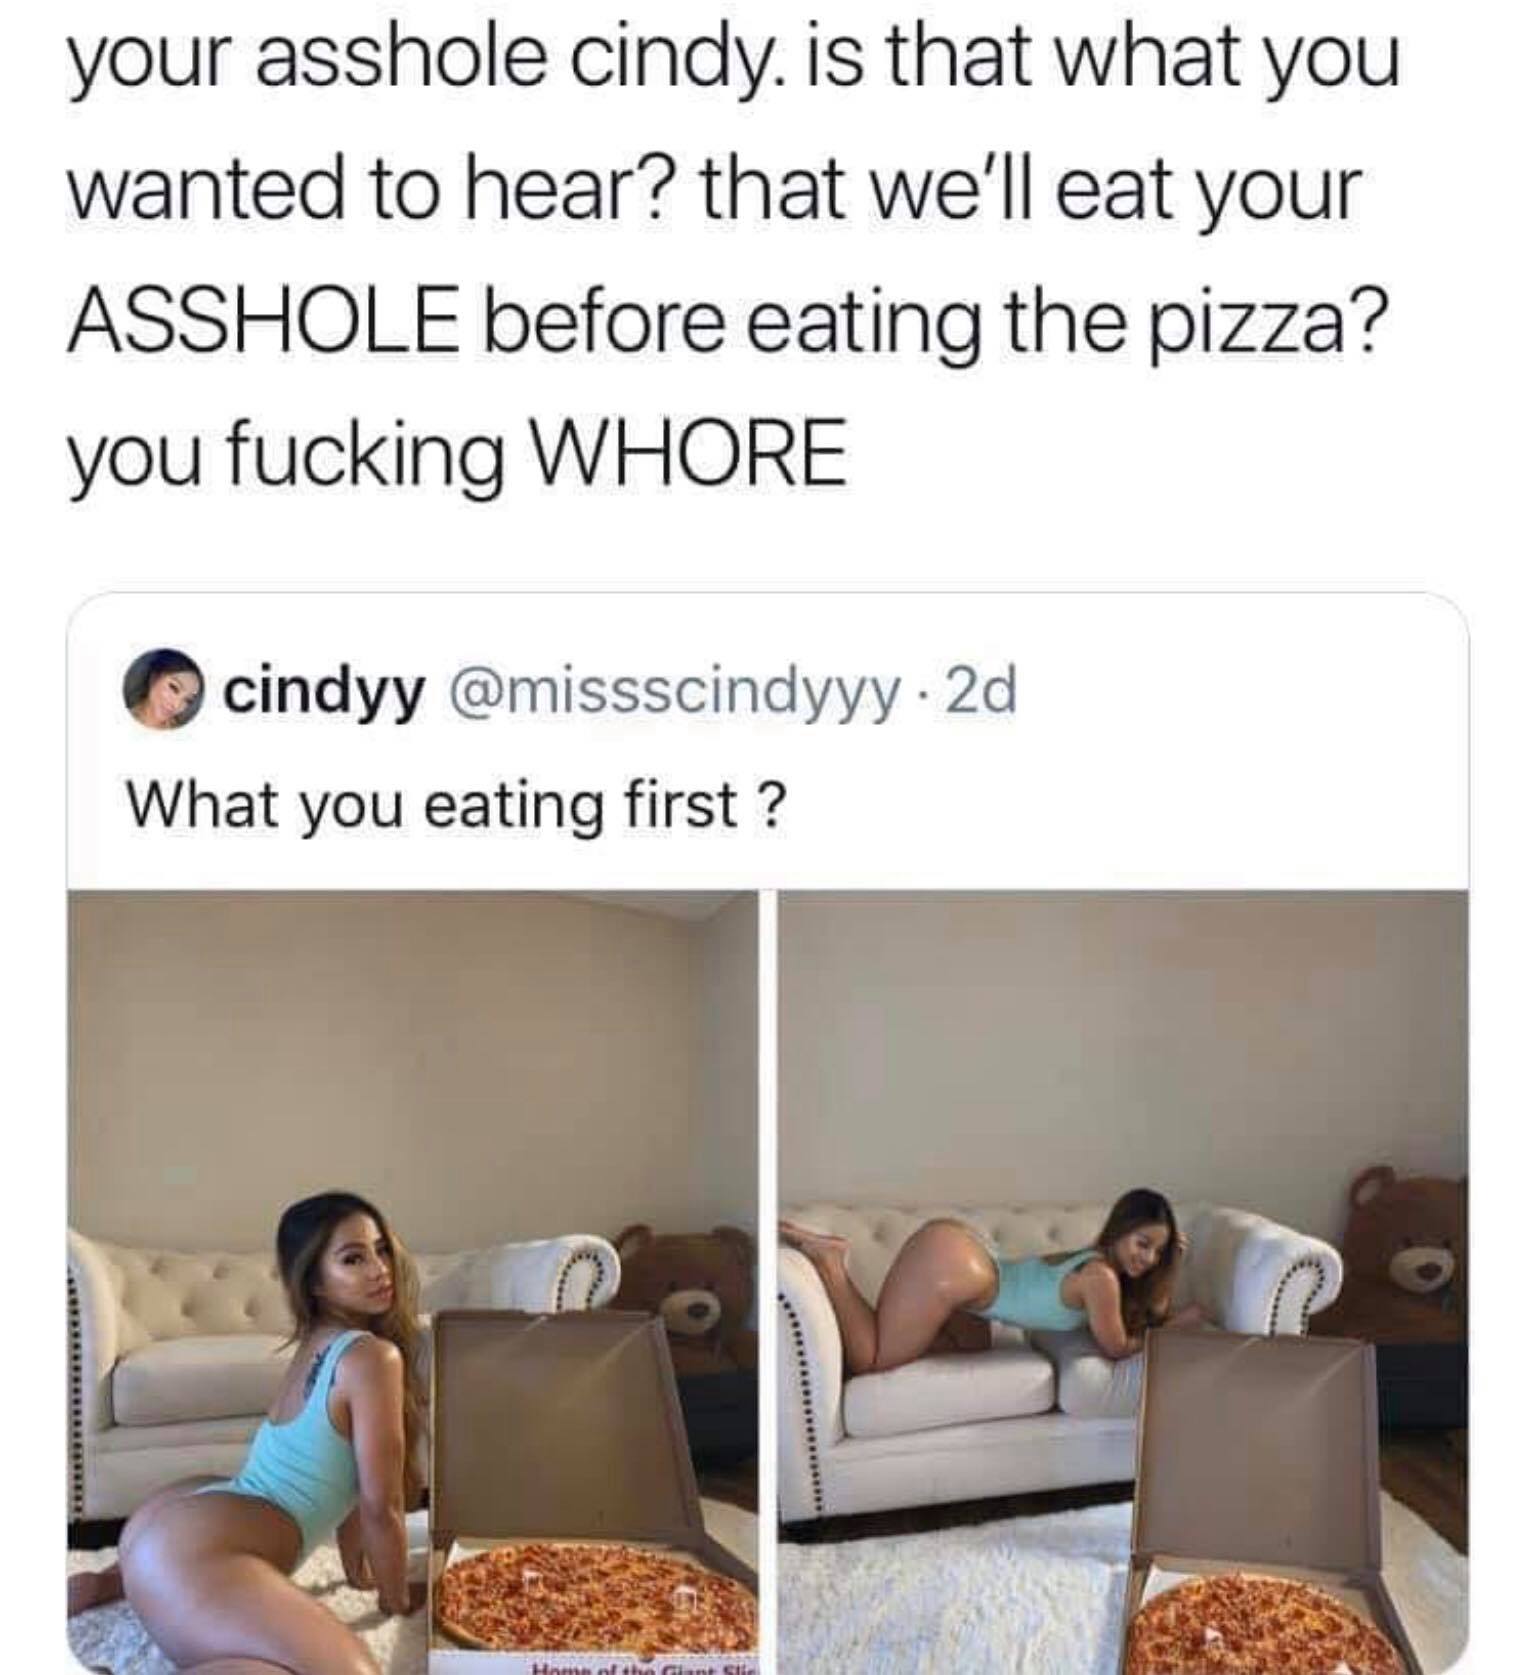 me or the pizza - your asshole cindy is that what you wanted to hear? that we'll eat your Asshole before eating the pizza? you fucking Whore cindyy . 2d What you eating first ?